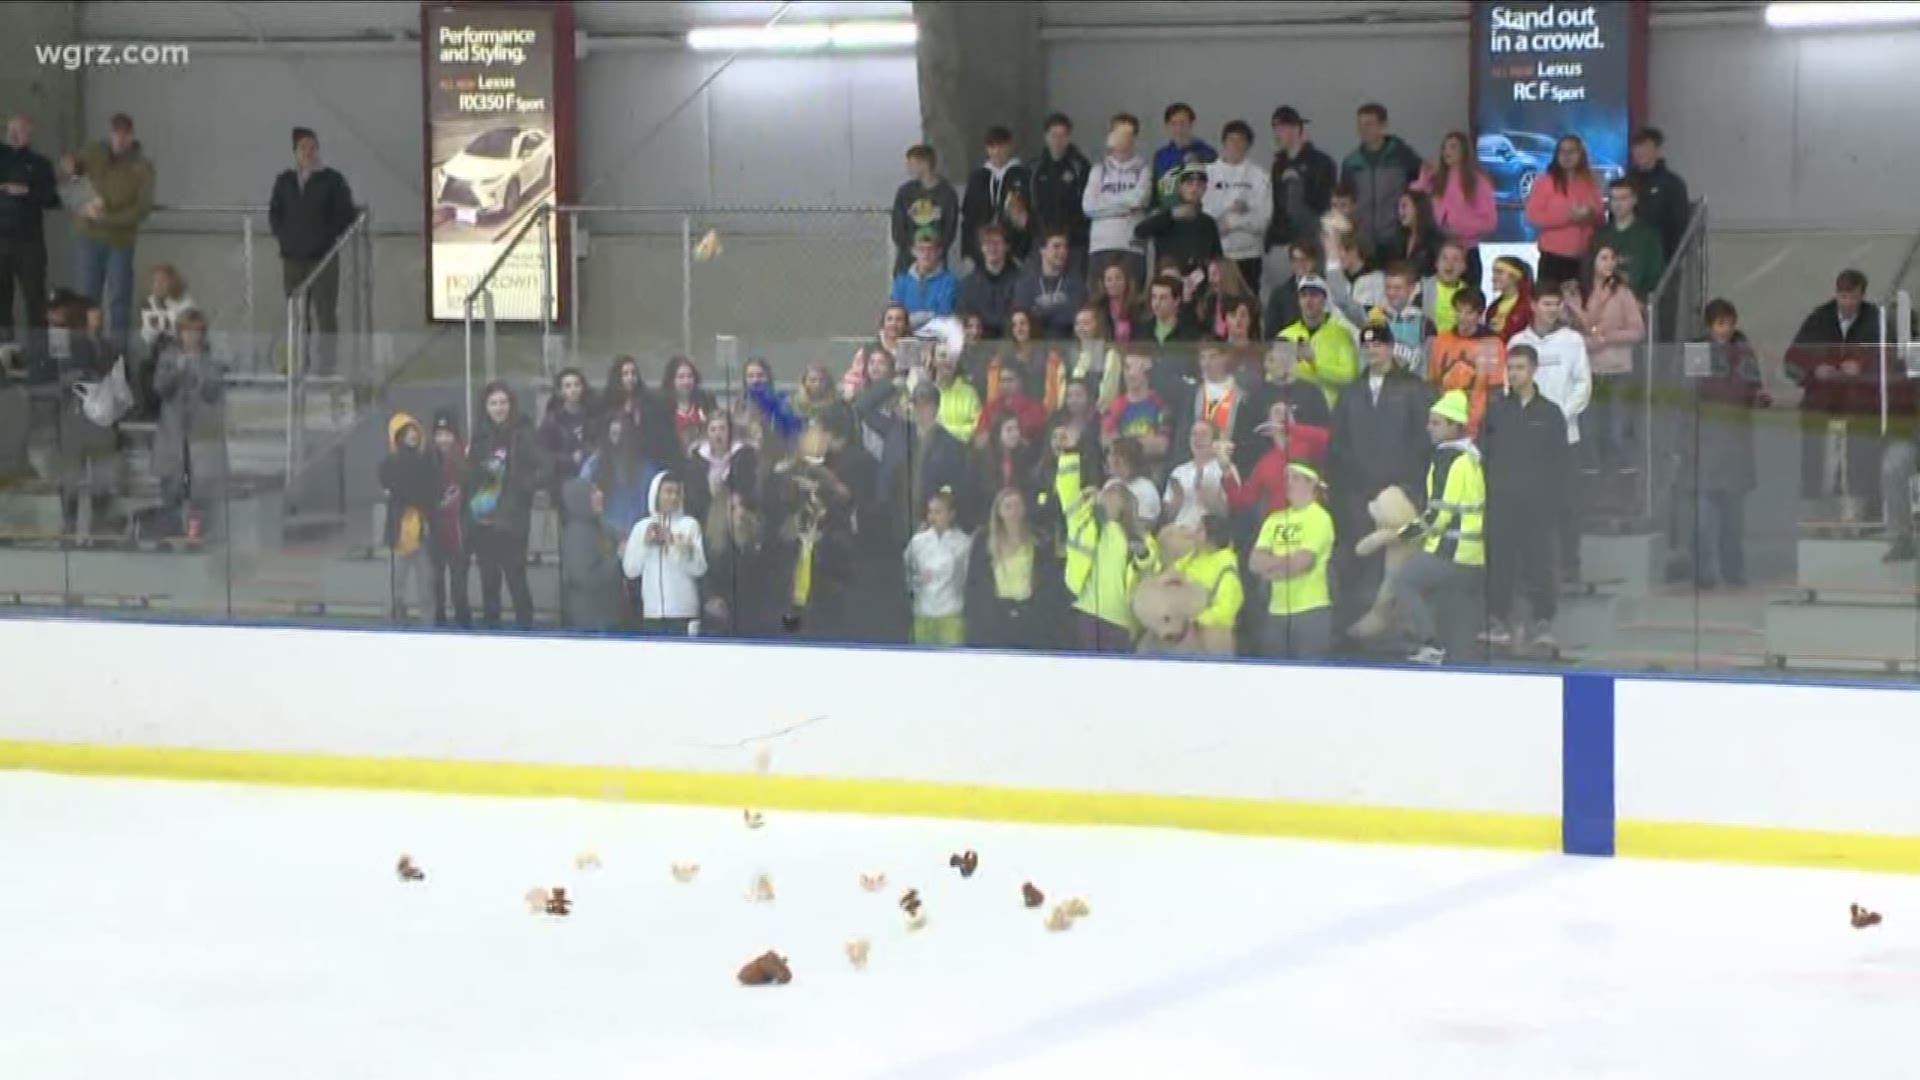 Rivalry hockey game uses teddy bears to support WNY charities